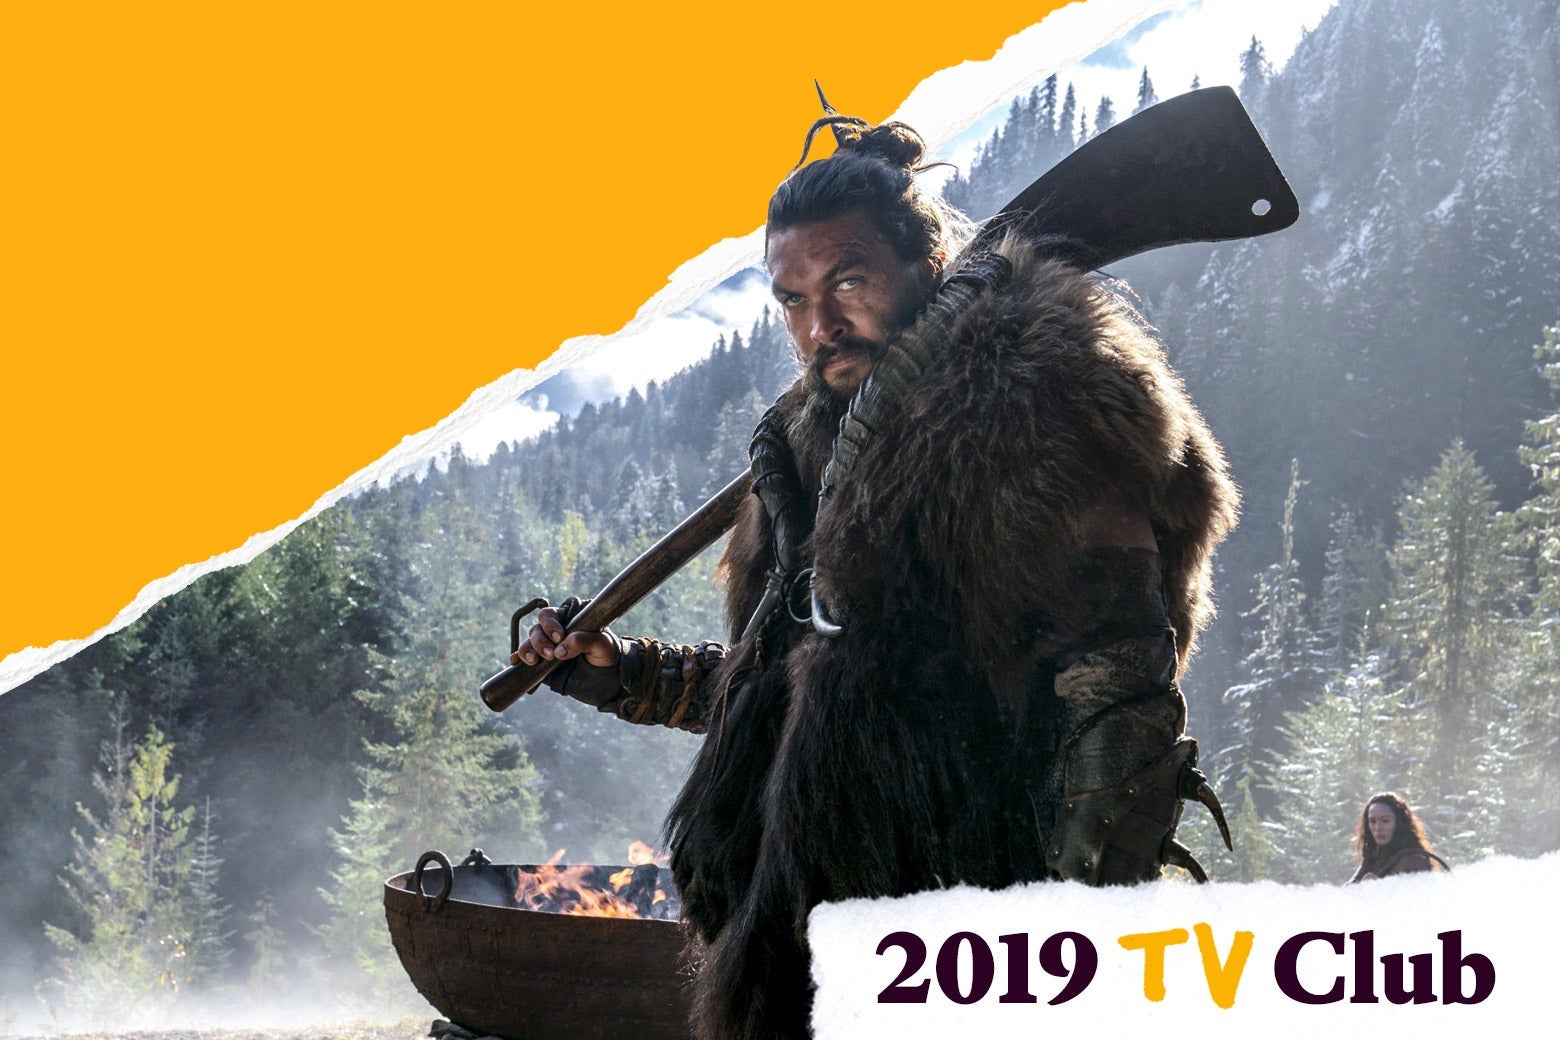 Jason Momoa in See holds a large blade and wears a fur in front of a forest. Text in the corner reads 2019 TV Club.